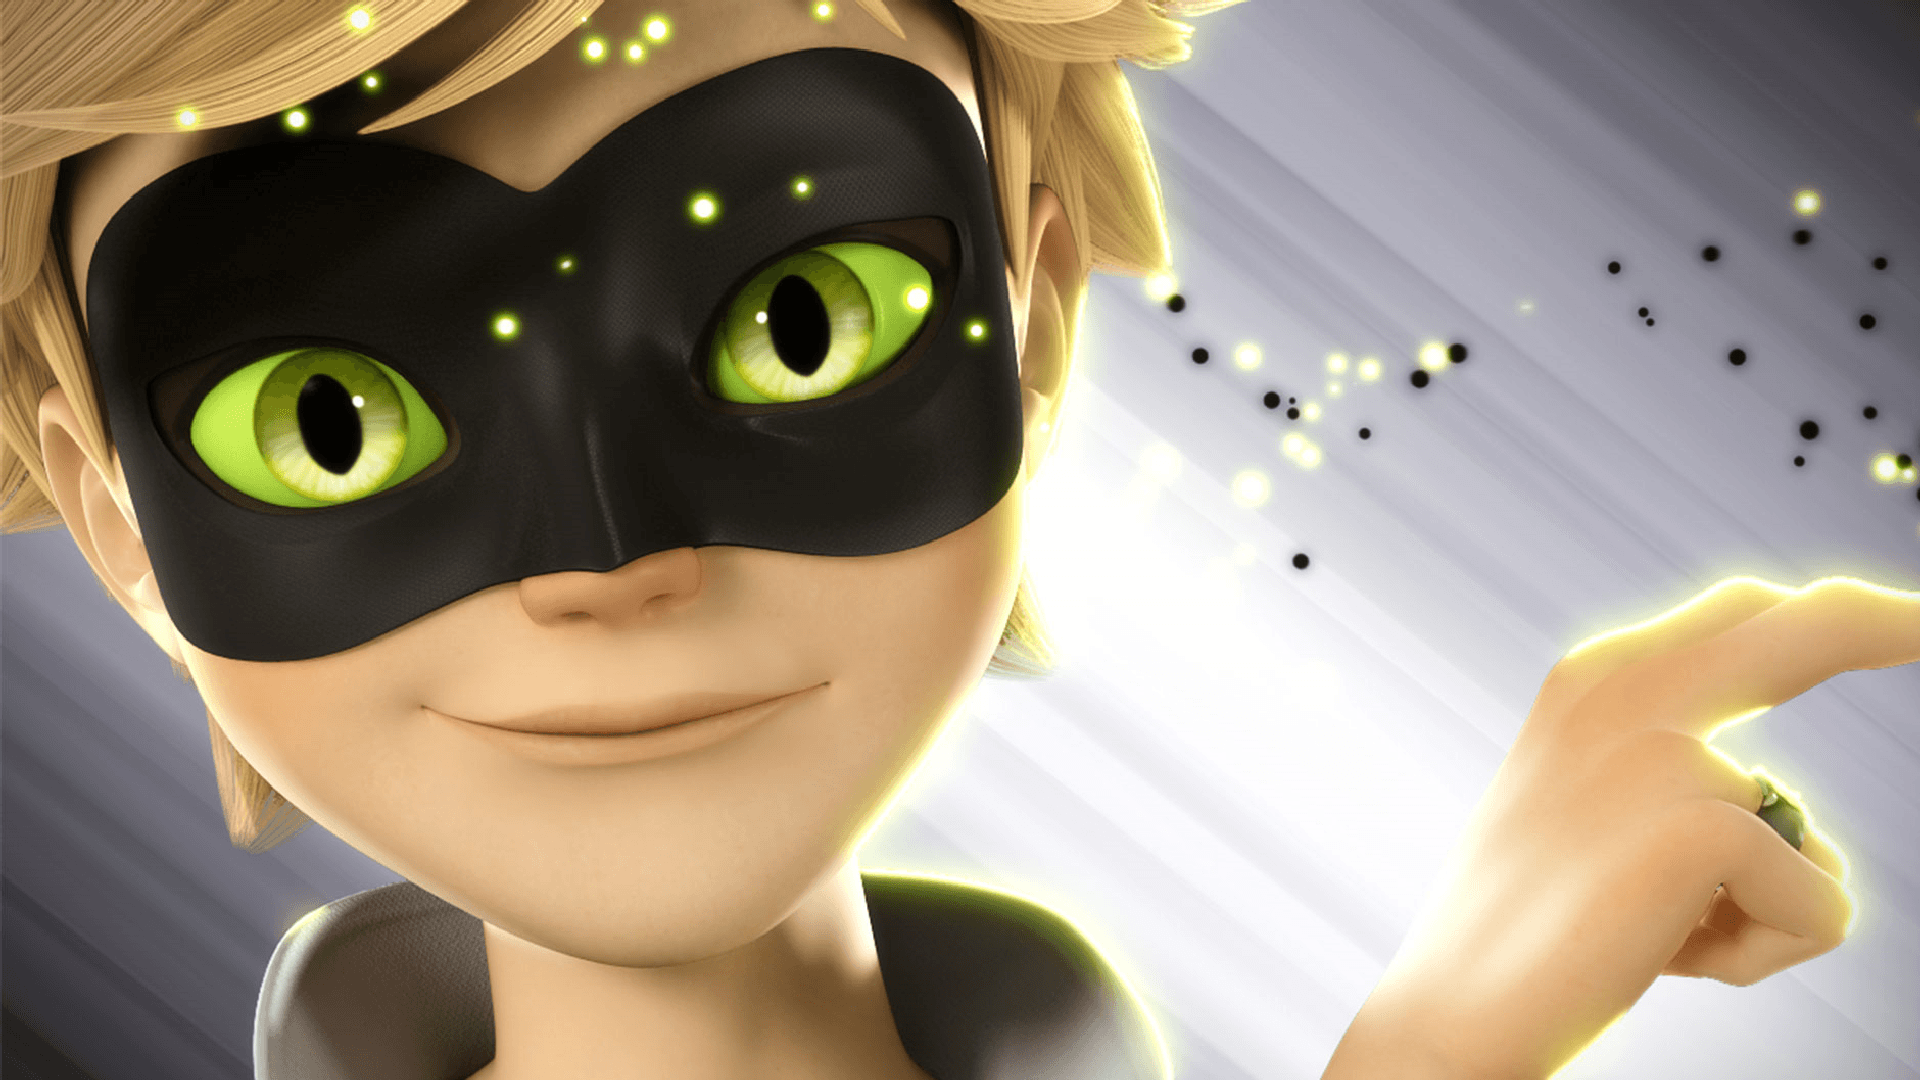 miraculous wallpapers.